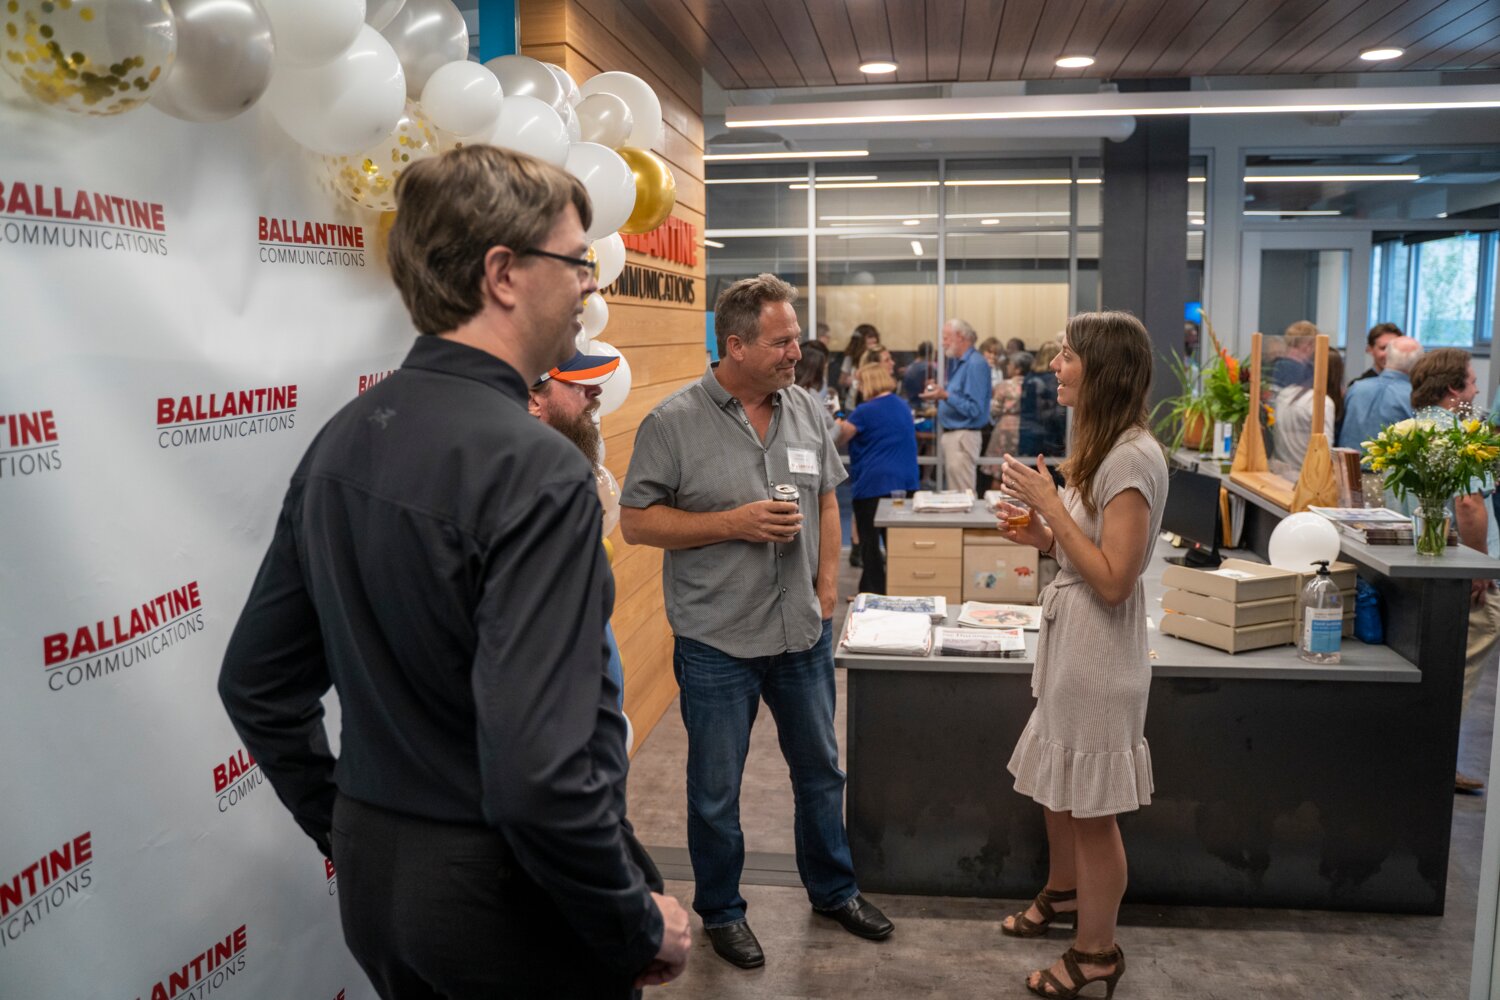 Ballantine Communications' 70th Anniversary and Open House in August 2022 — Ballantine employees (l to r) Scott McCool, Scotty Yarbrough, Tad Smith and Kelly Bulkley